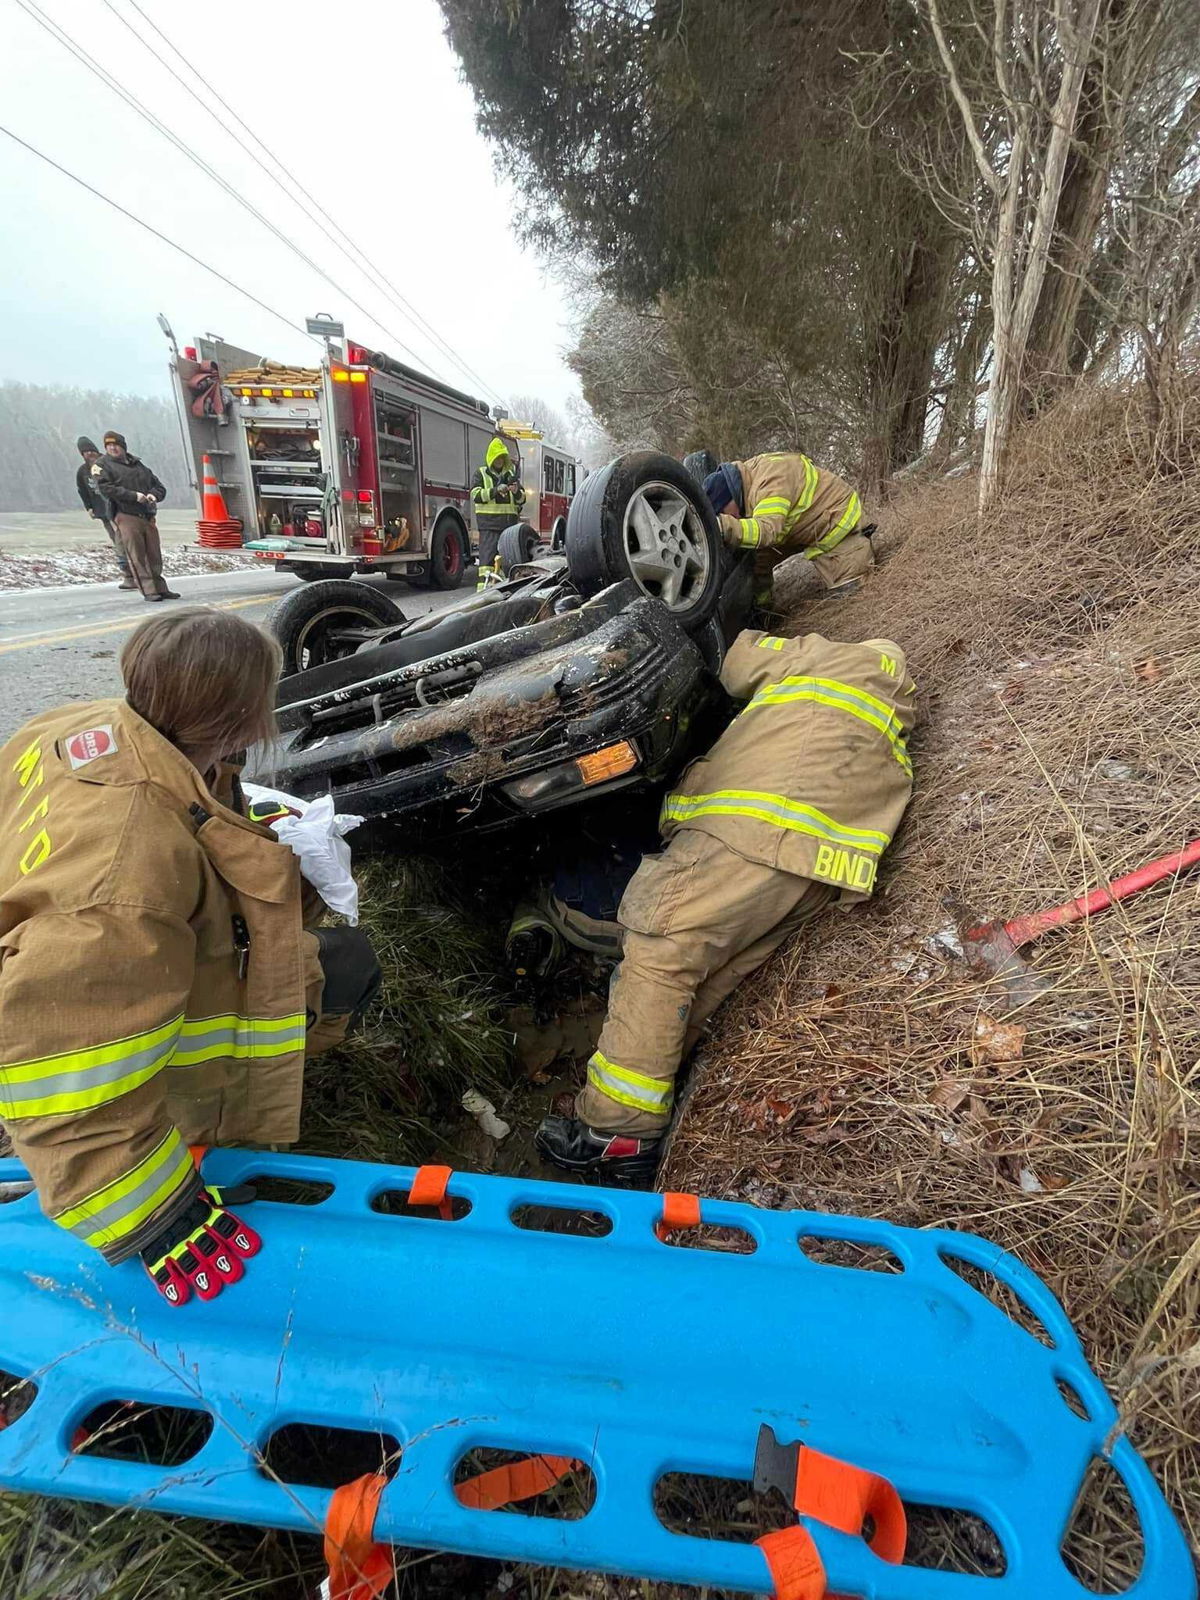 <i>Monroe Township FD/WLKY</i><br/>A woman and her two dogs were pulled to safety from a car that flipped over into a ditch.